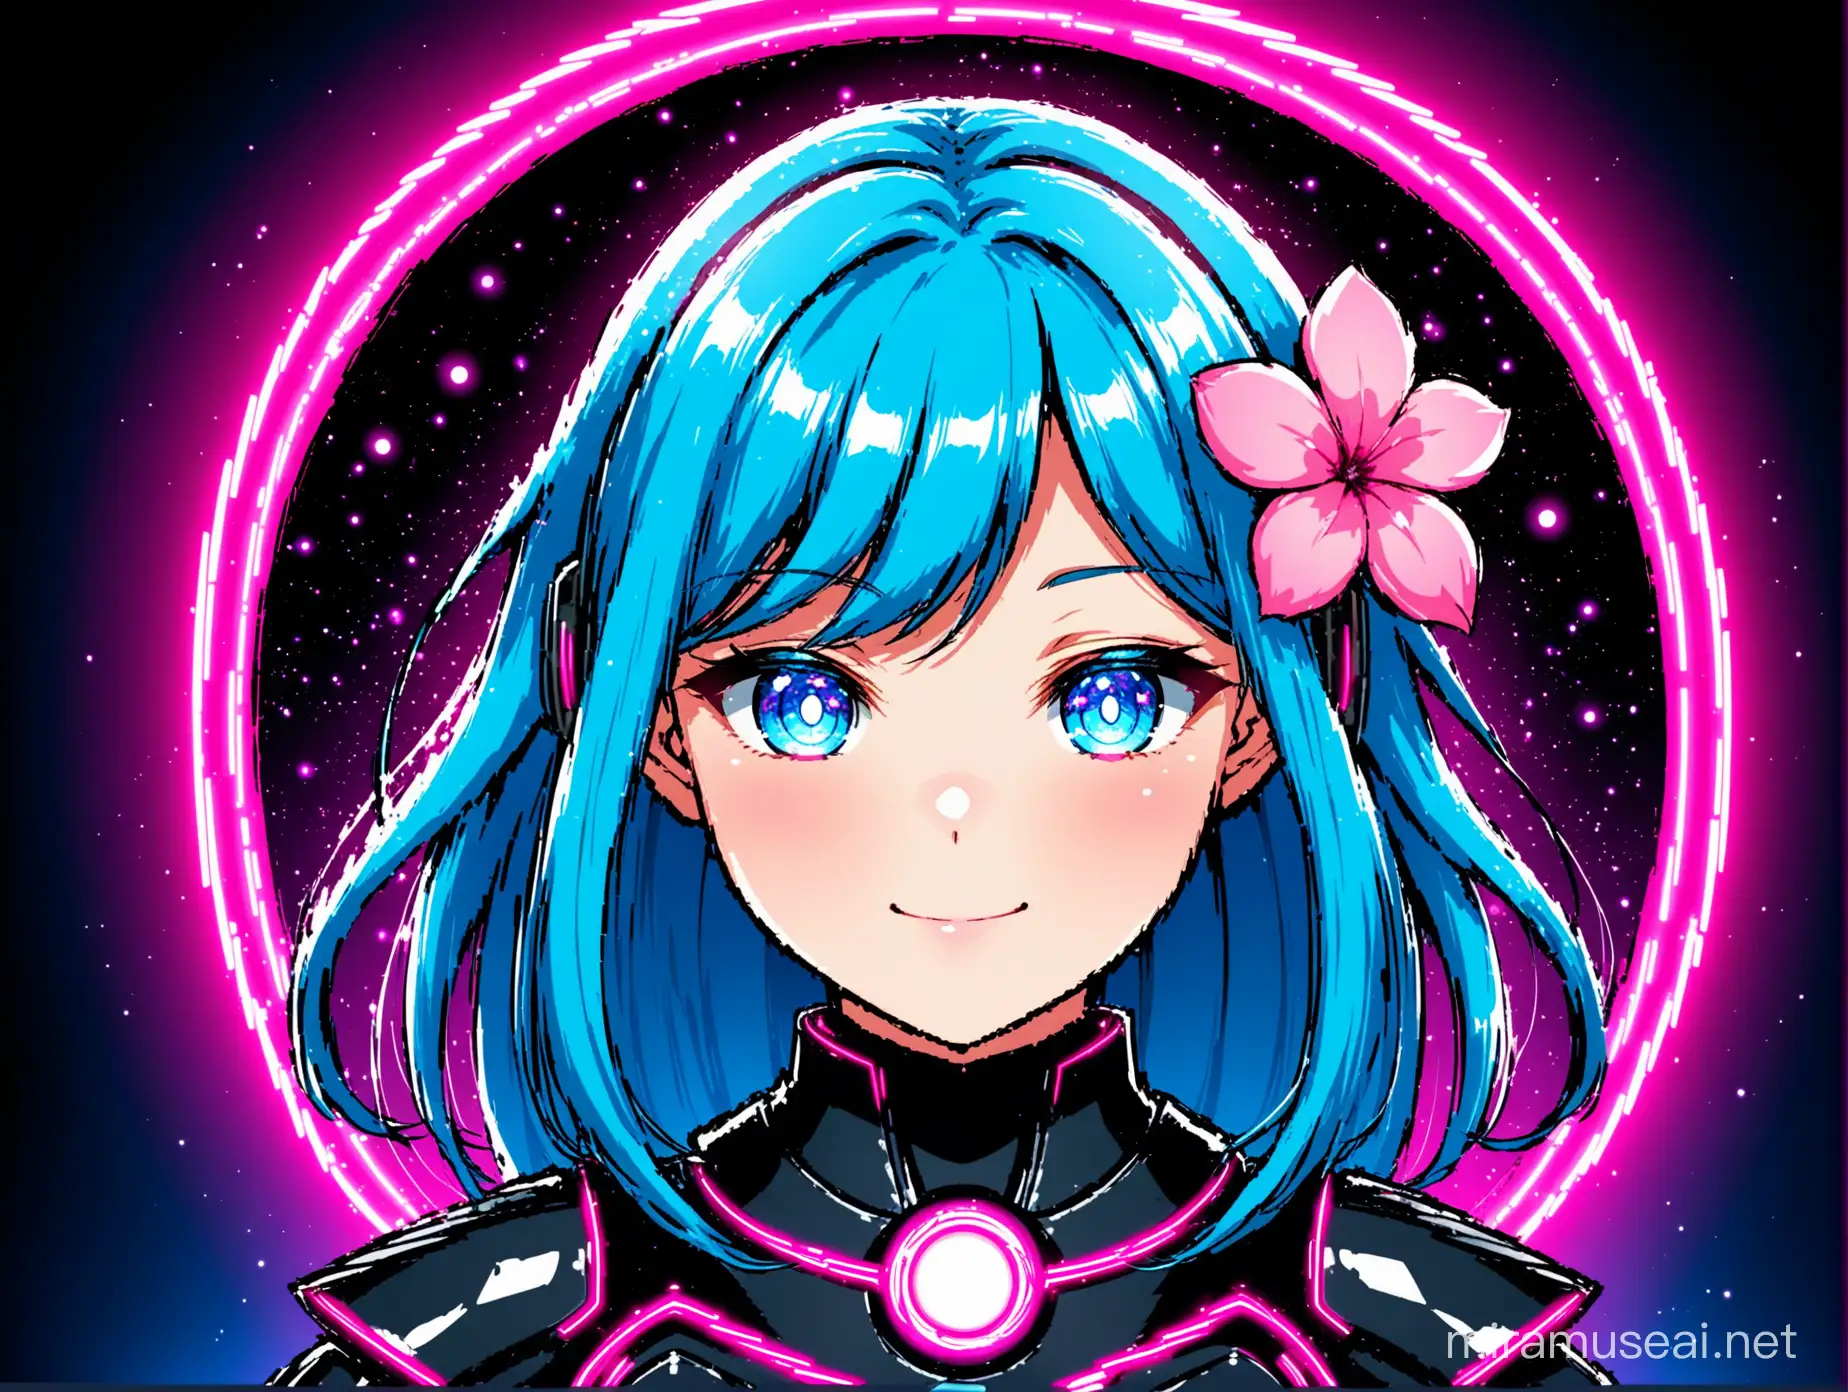 Futuristic Anime Girl with Blue Hair and Neon Armor